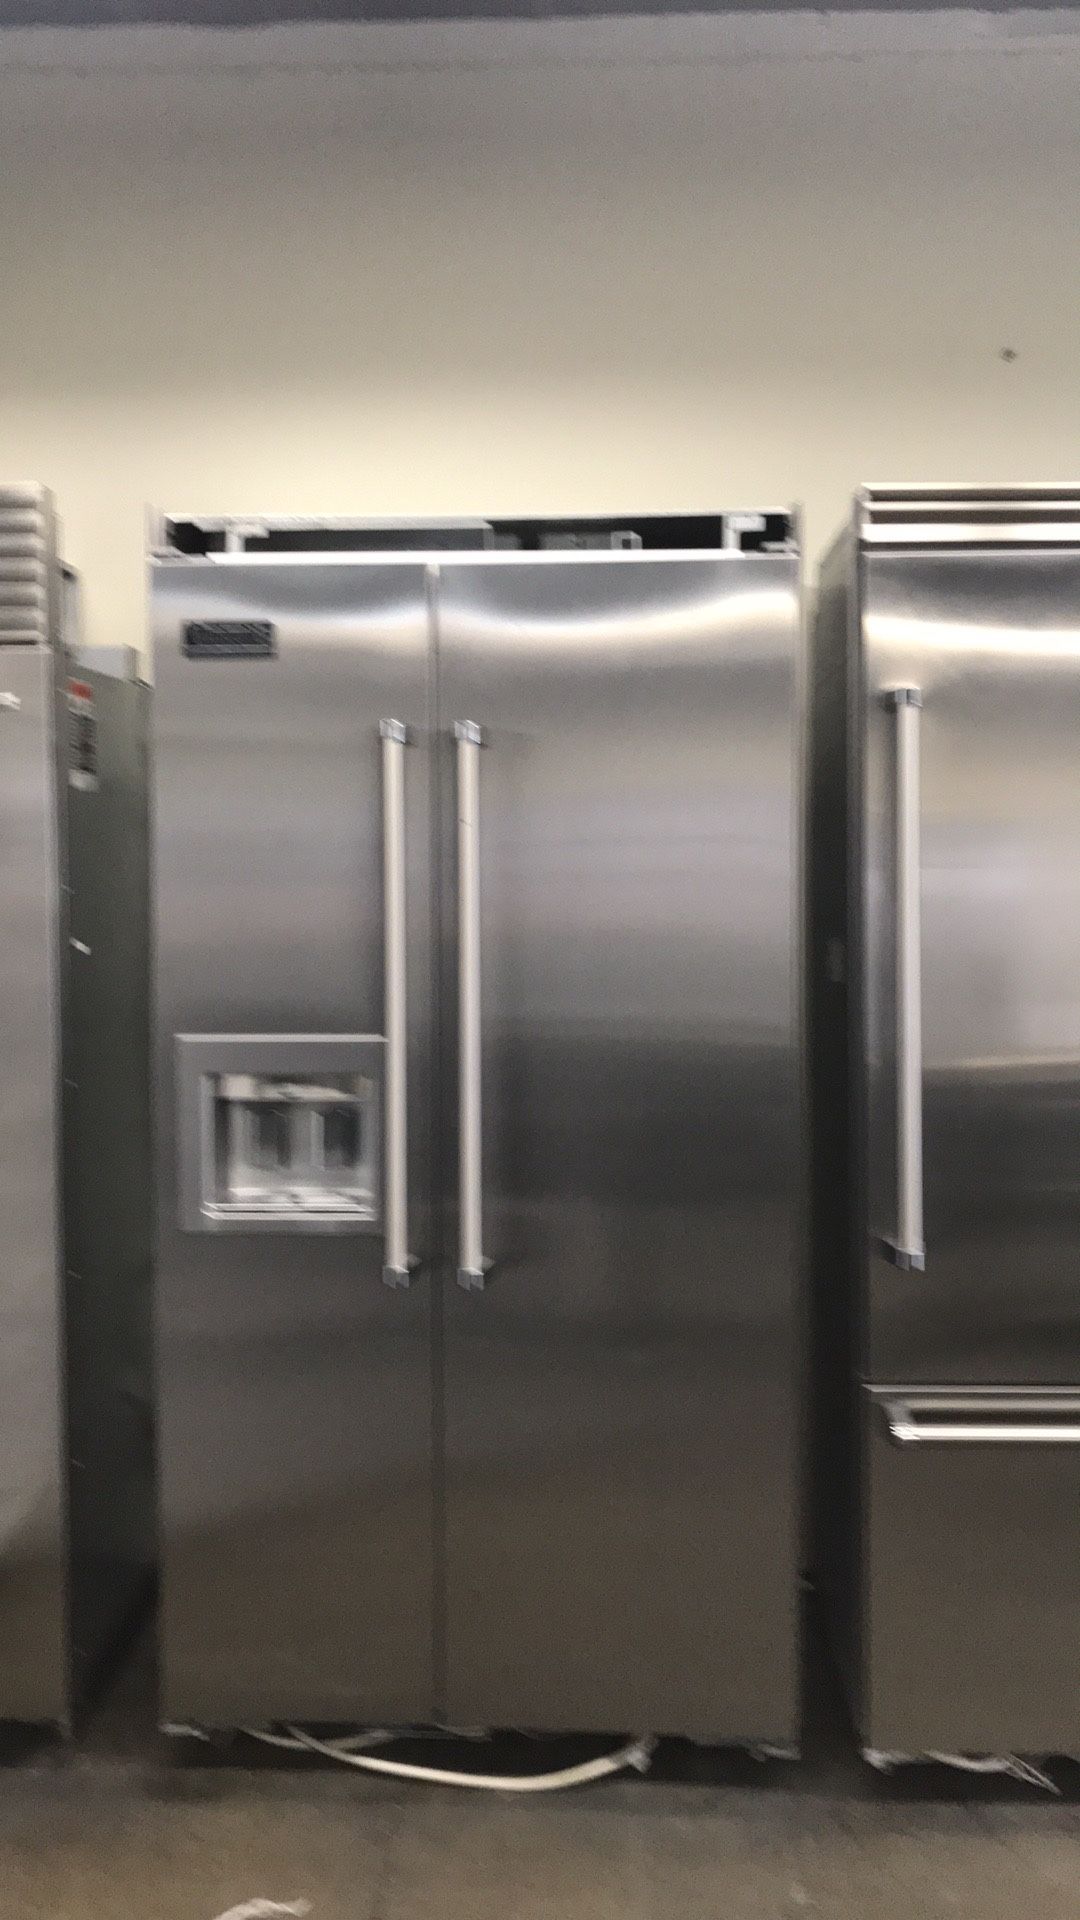 Viking 42”Wide Stainless Steel Built In Side By Side Refrigerator 